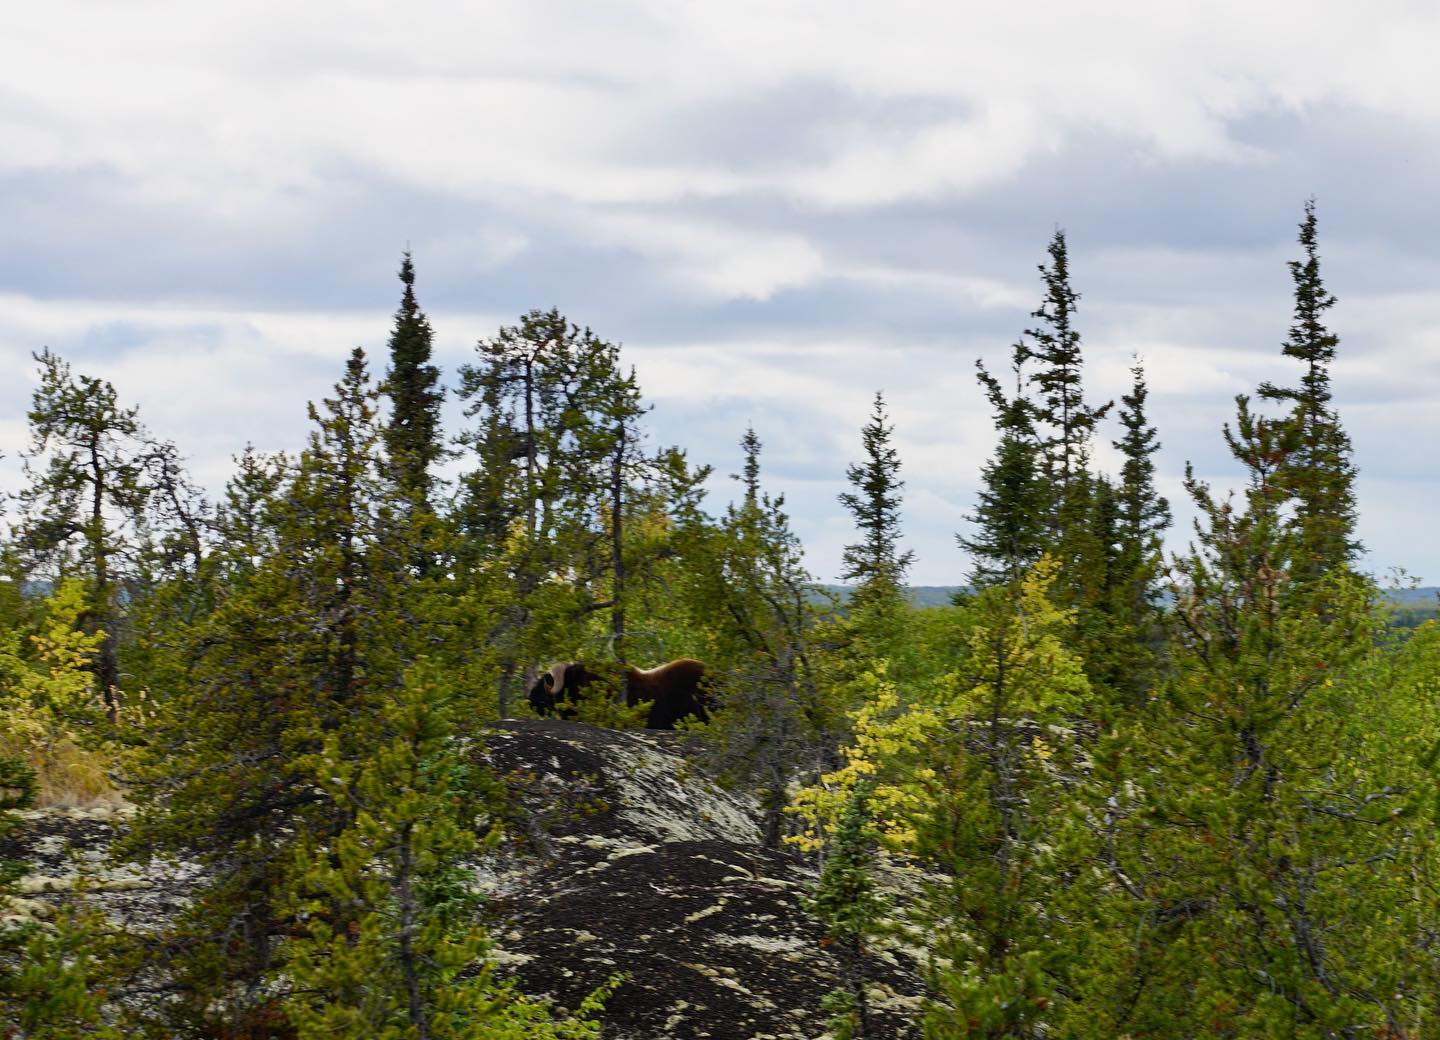 Who’s that hiding in the trees? A muskox! We’re pretty lucky that we have sightings off our hiking trails in the fall 🤩
* * *
📸 James Hargreaves
* * *
#thisisblachford #spectacularnwt #northernlights #blachfordlakelodge #blachford #canada #canadian #keepexploring #explorecanada #northof60 #earthpix #travelherendxt #travelpix #earthofficial #cangeo #natgeotravel  #getoutside #potd #welcome #vacation #truenorth #wildlife #visitor #chooseyourownadventure #muskox